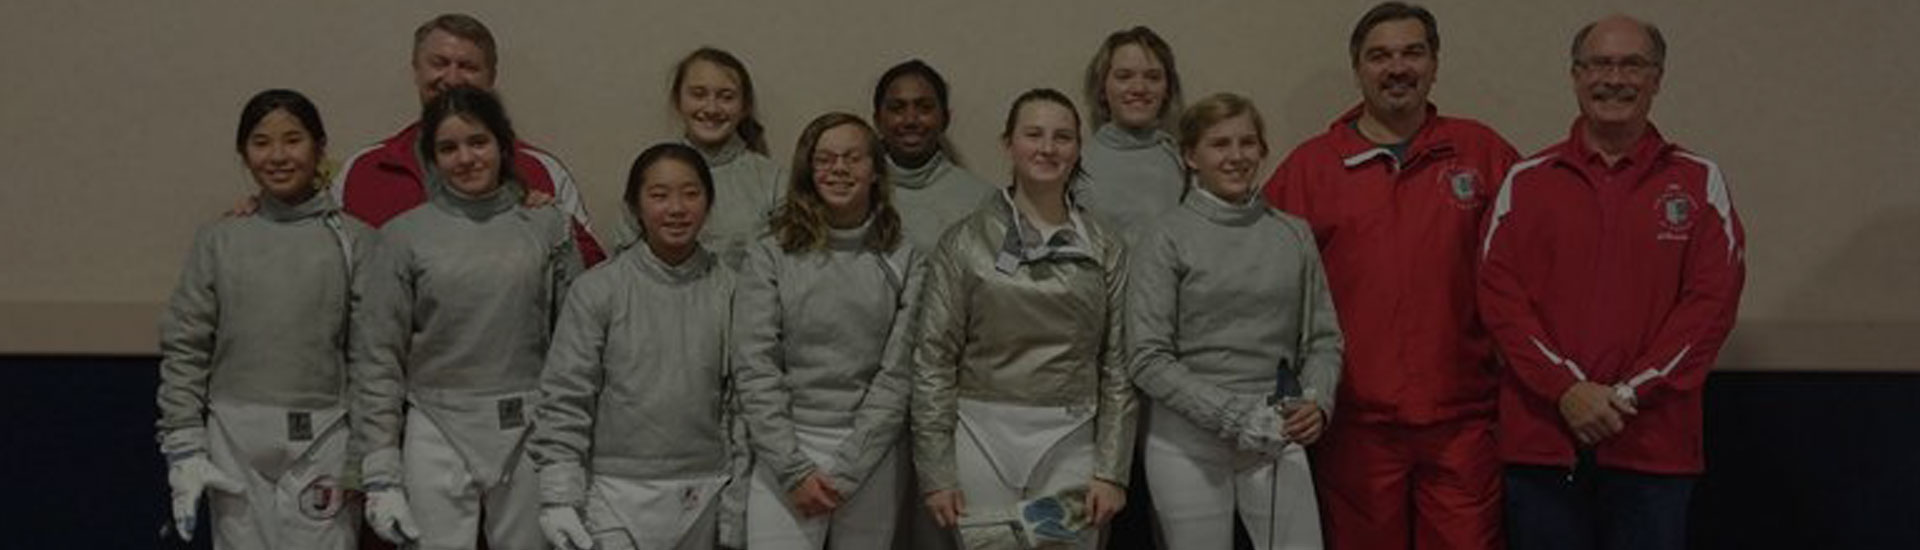 Fencing is a great team sport!